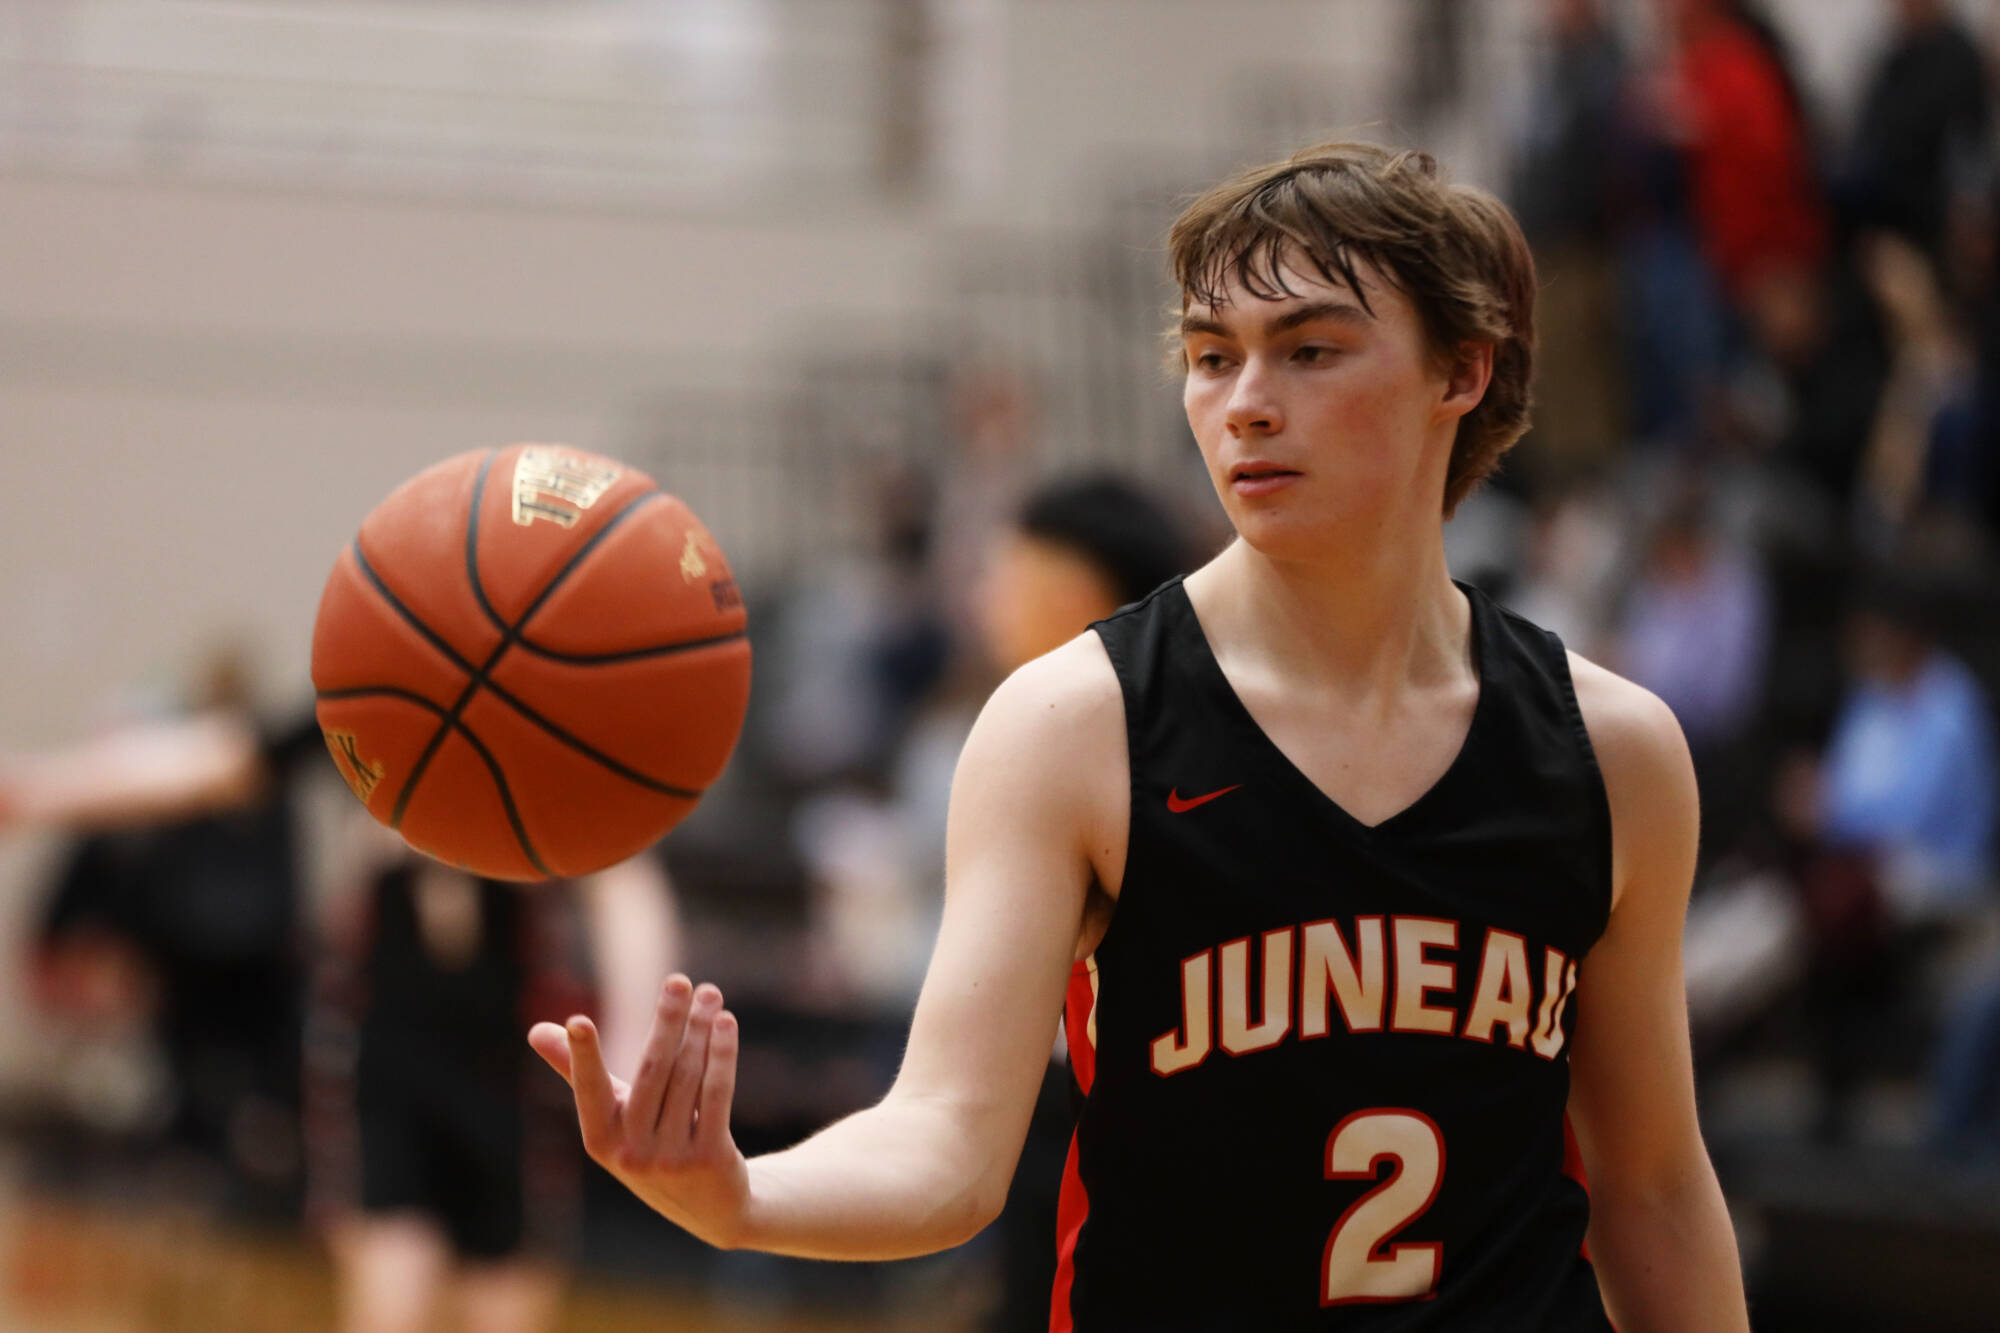 Senior Bodhi Nelson throws the ball up during warm ups going into the second half during Thursday night’s game against South Anchorage High School during the first night of the Princess Cruises Capital City Classic. (Clarise Larson / Juneau Empire)